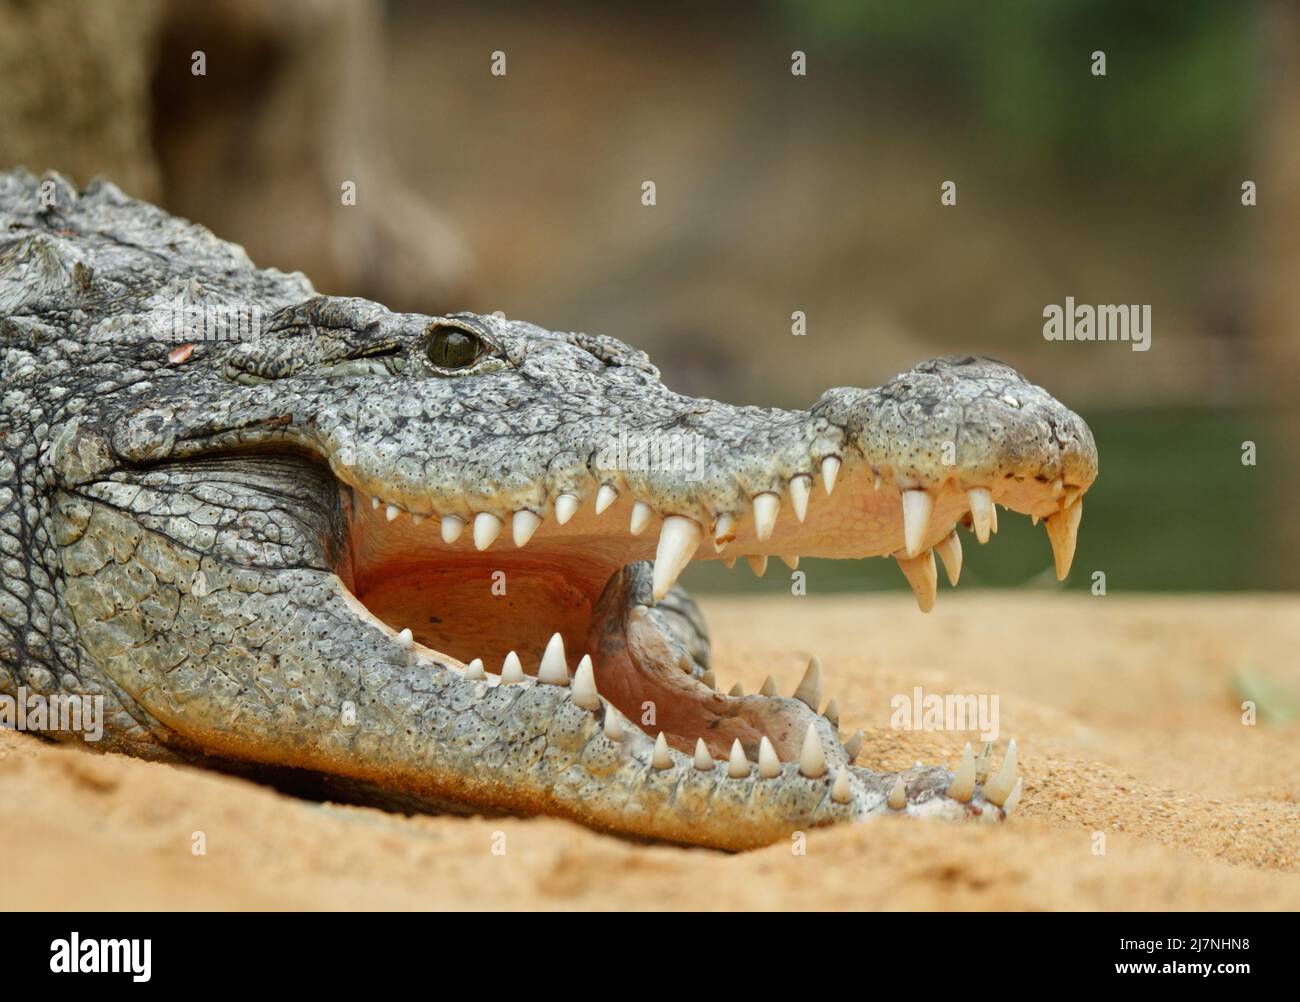 Closeup Of Head Of Crocodile With Sharp Teeth And Jaw With Wide Open Mouth Stock Photo